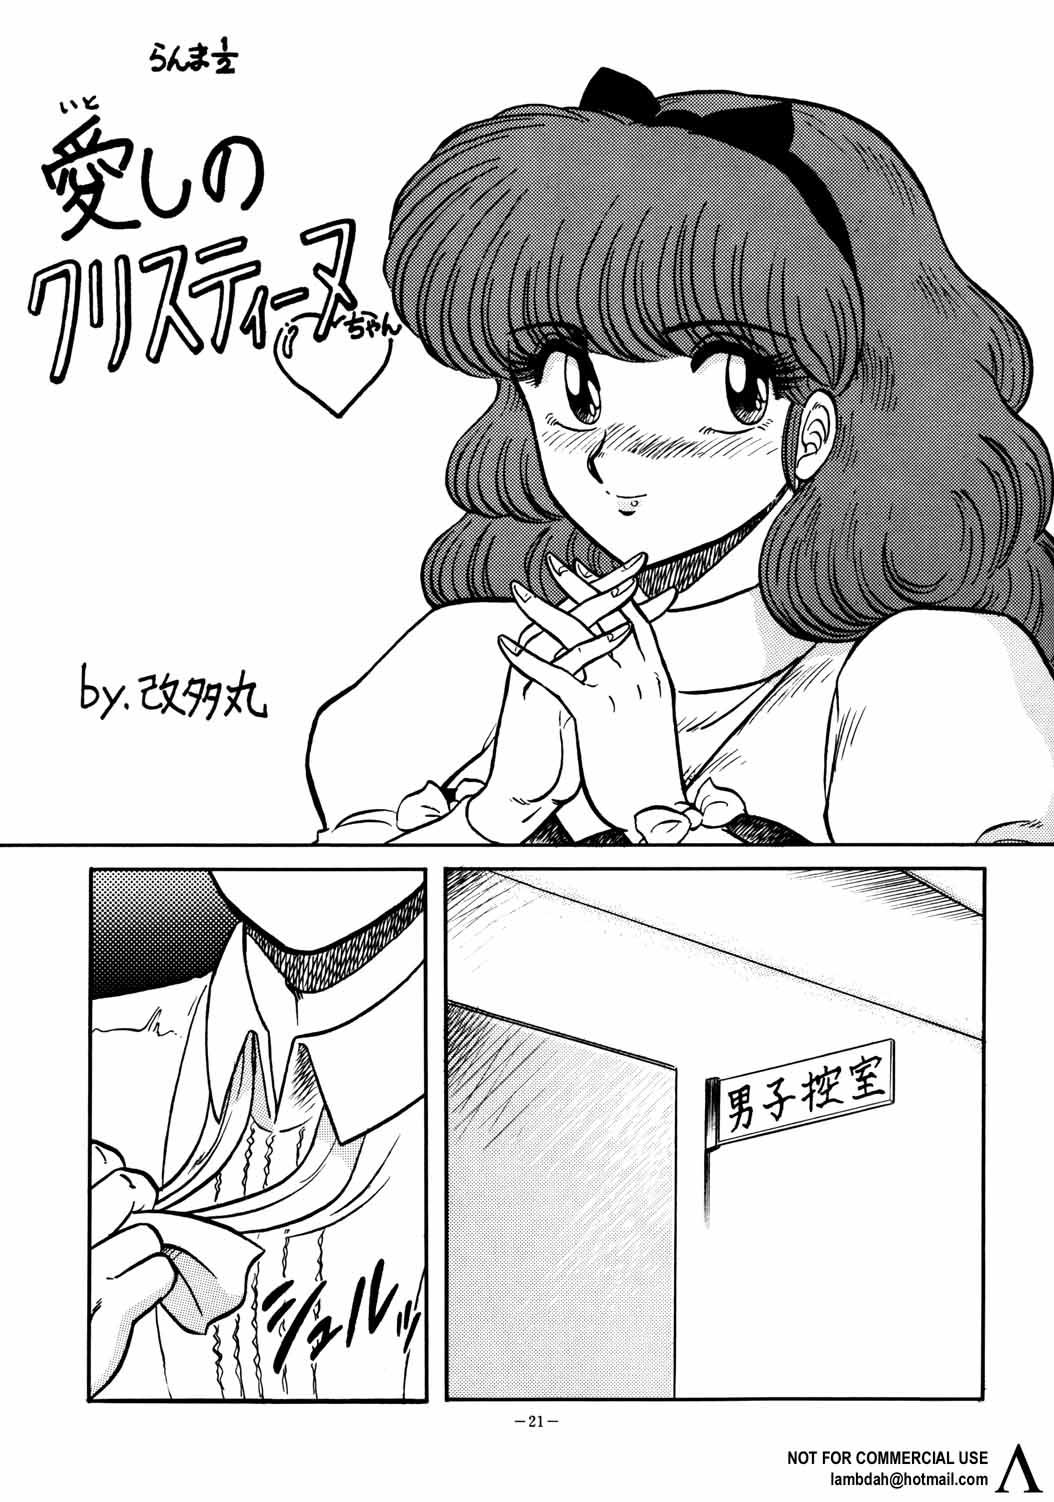 Boys Look Out 26 - Sailor moon Ranma 12 Video girl ai Hot Mom - Page 9